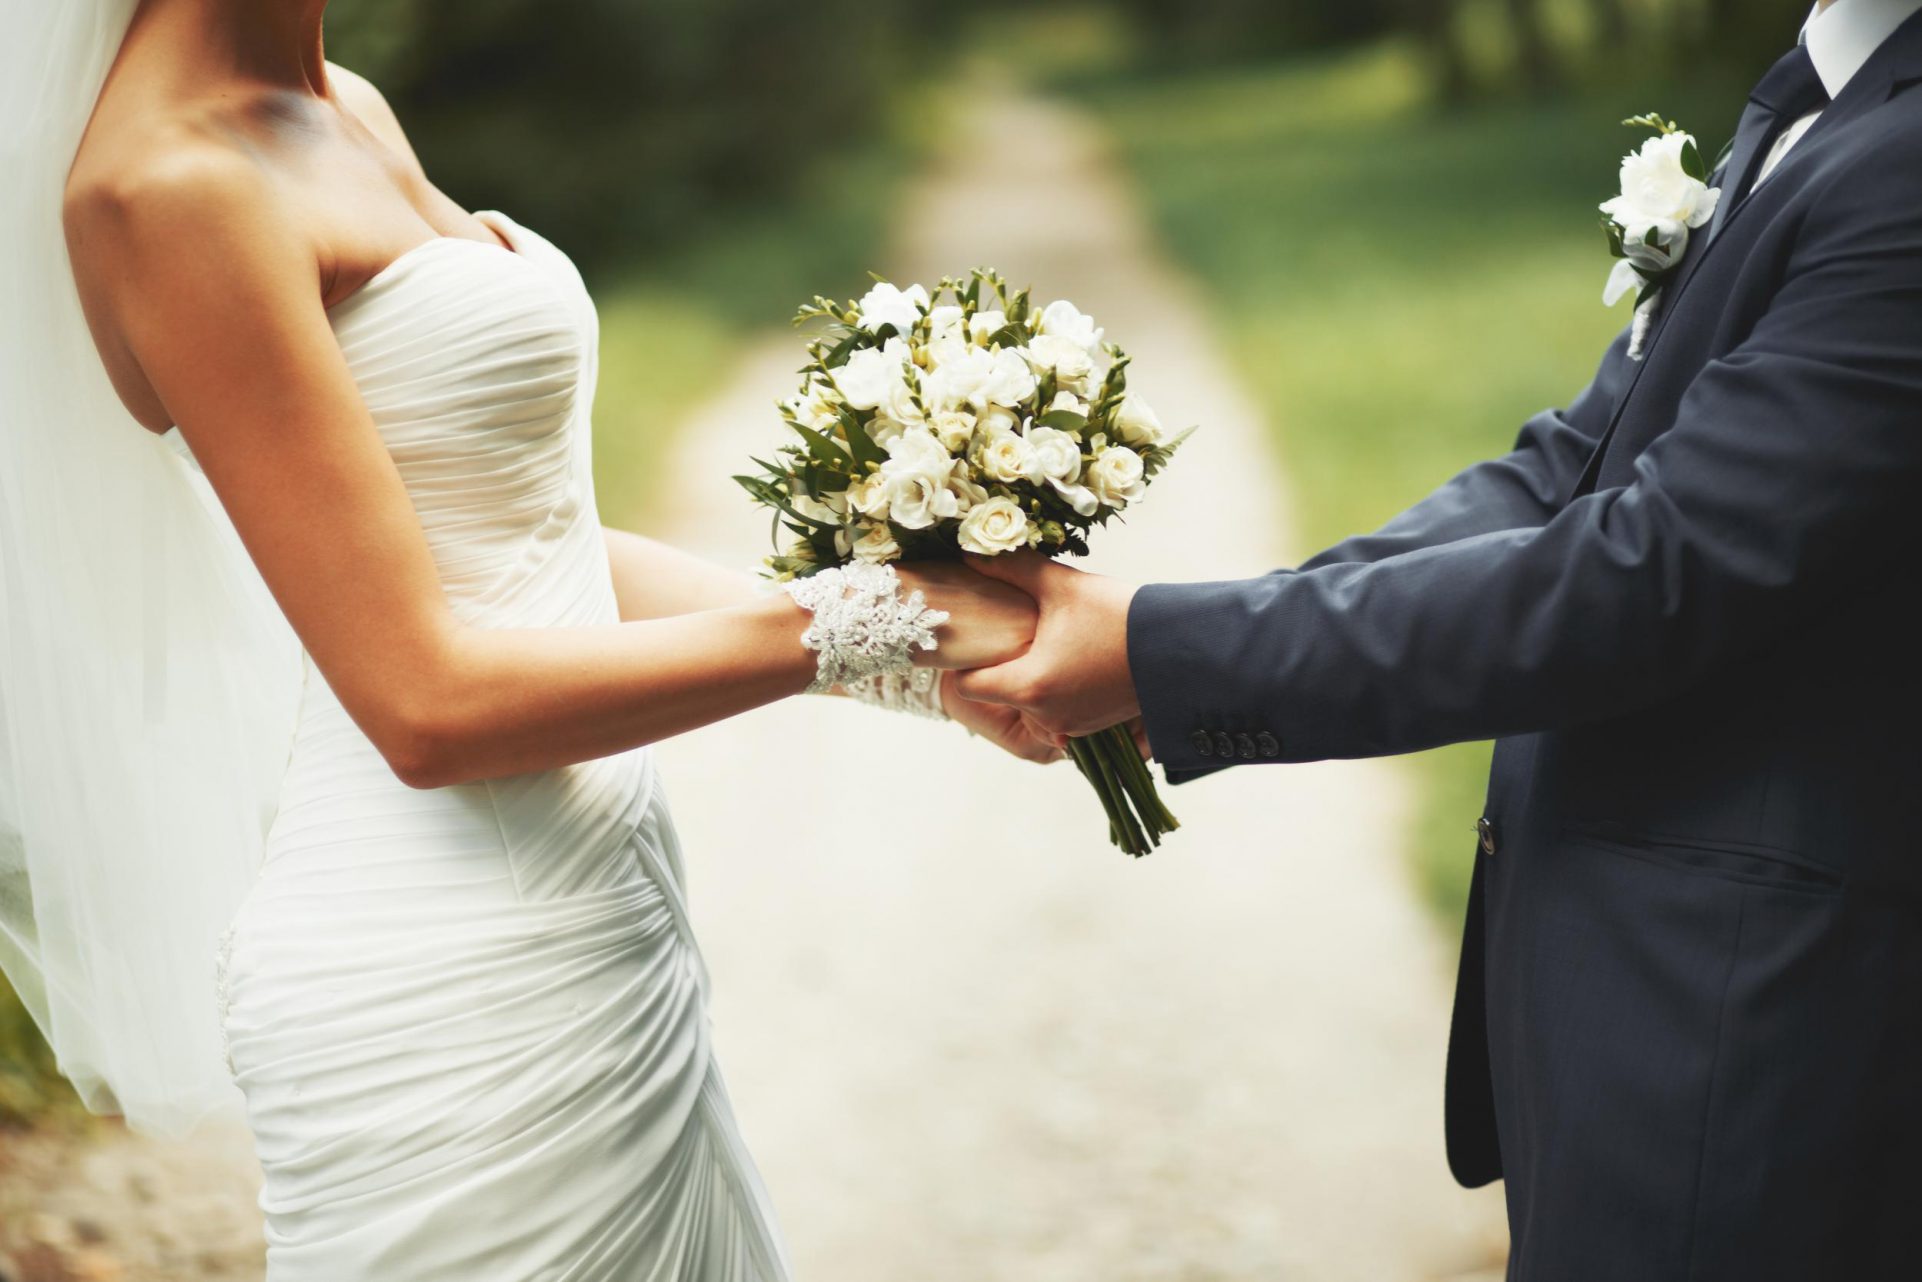 Finding The Perfect Words: Wedding Anniversary Wishes for Sister And Brother-In-Law |